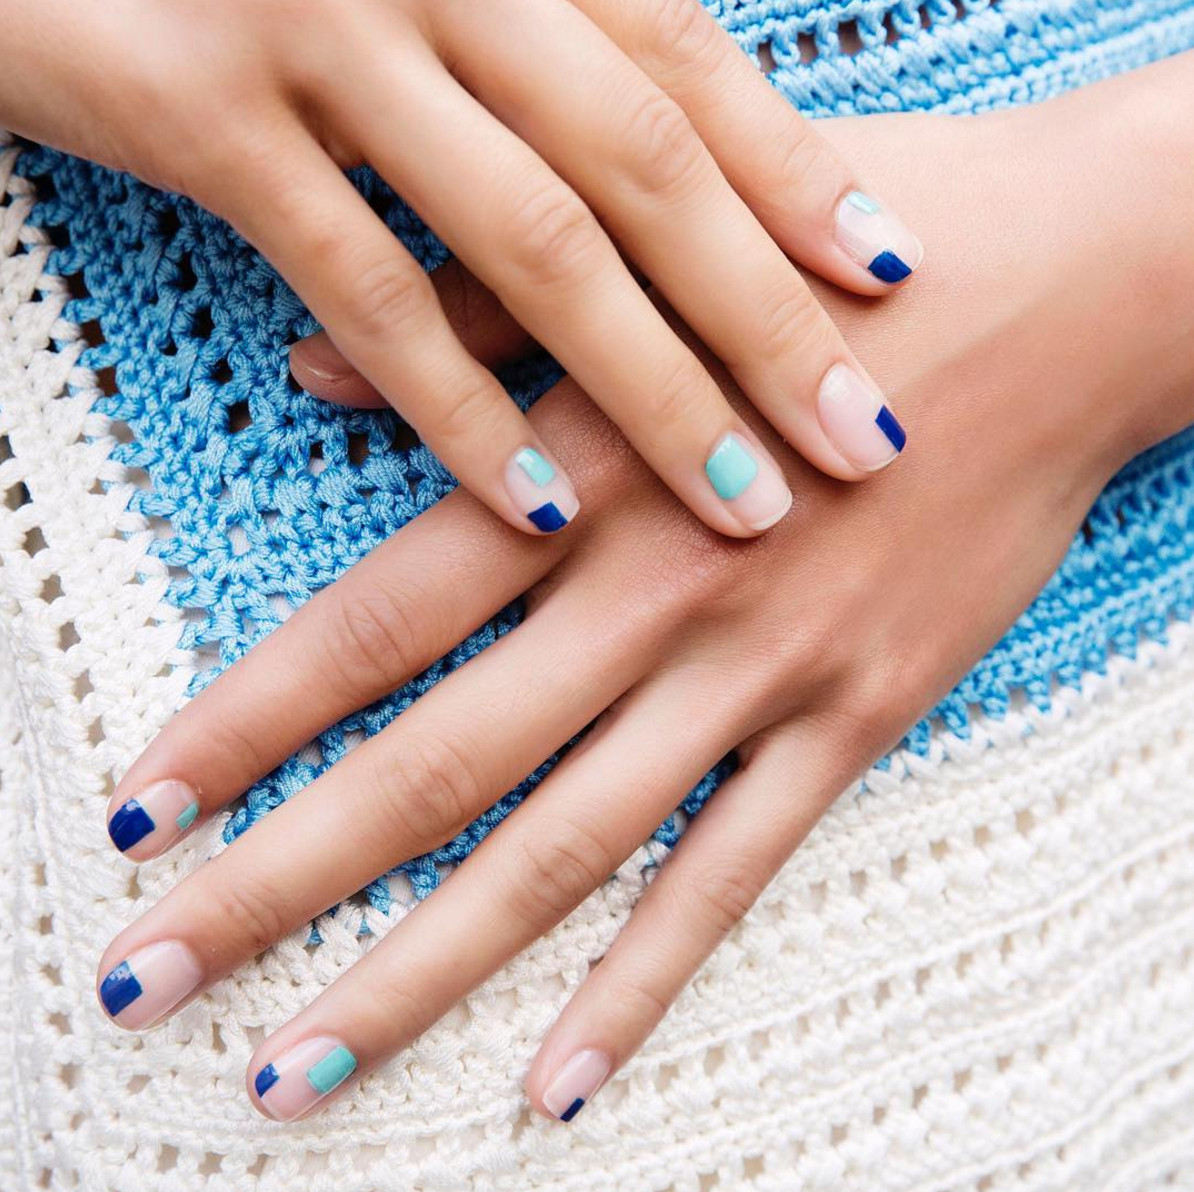 Popular Spring Nail Colors
 The Best Nail Polish Colors and Trends for Spring 2017